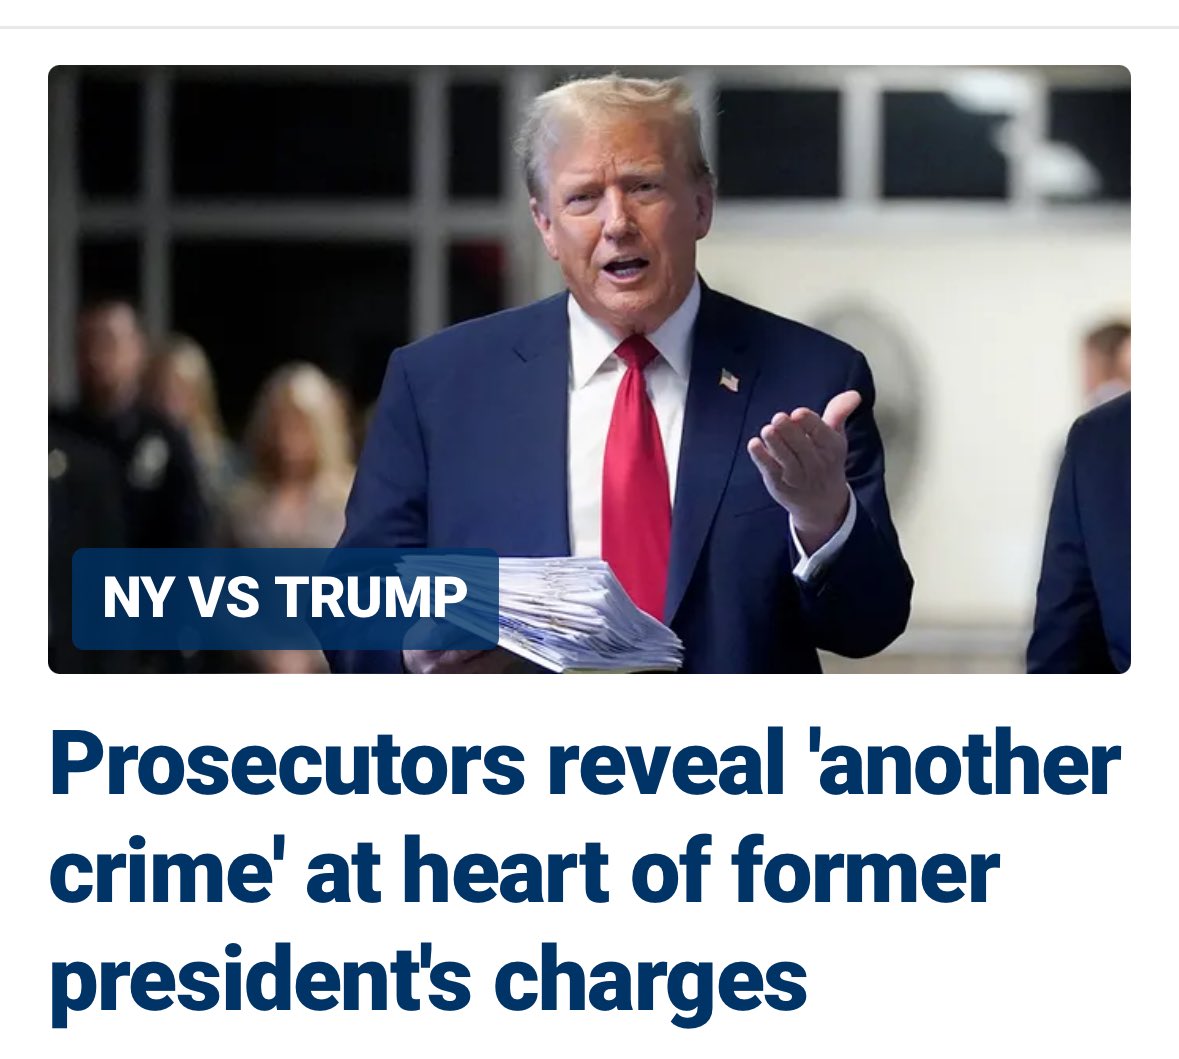 The constitution requires prosecutors to “reveal” the charges IN THE INDICTMENT You have to put the defendant on notice of exactly what he’s accused of BEFORE you start the trial Merchan has failed in his duty to ensure a fair trial